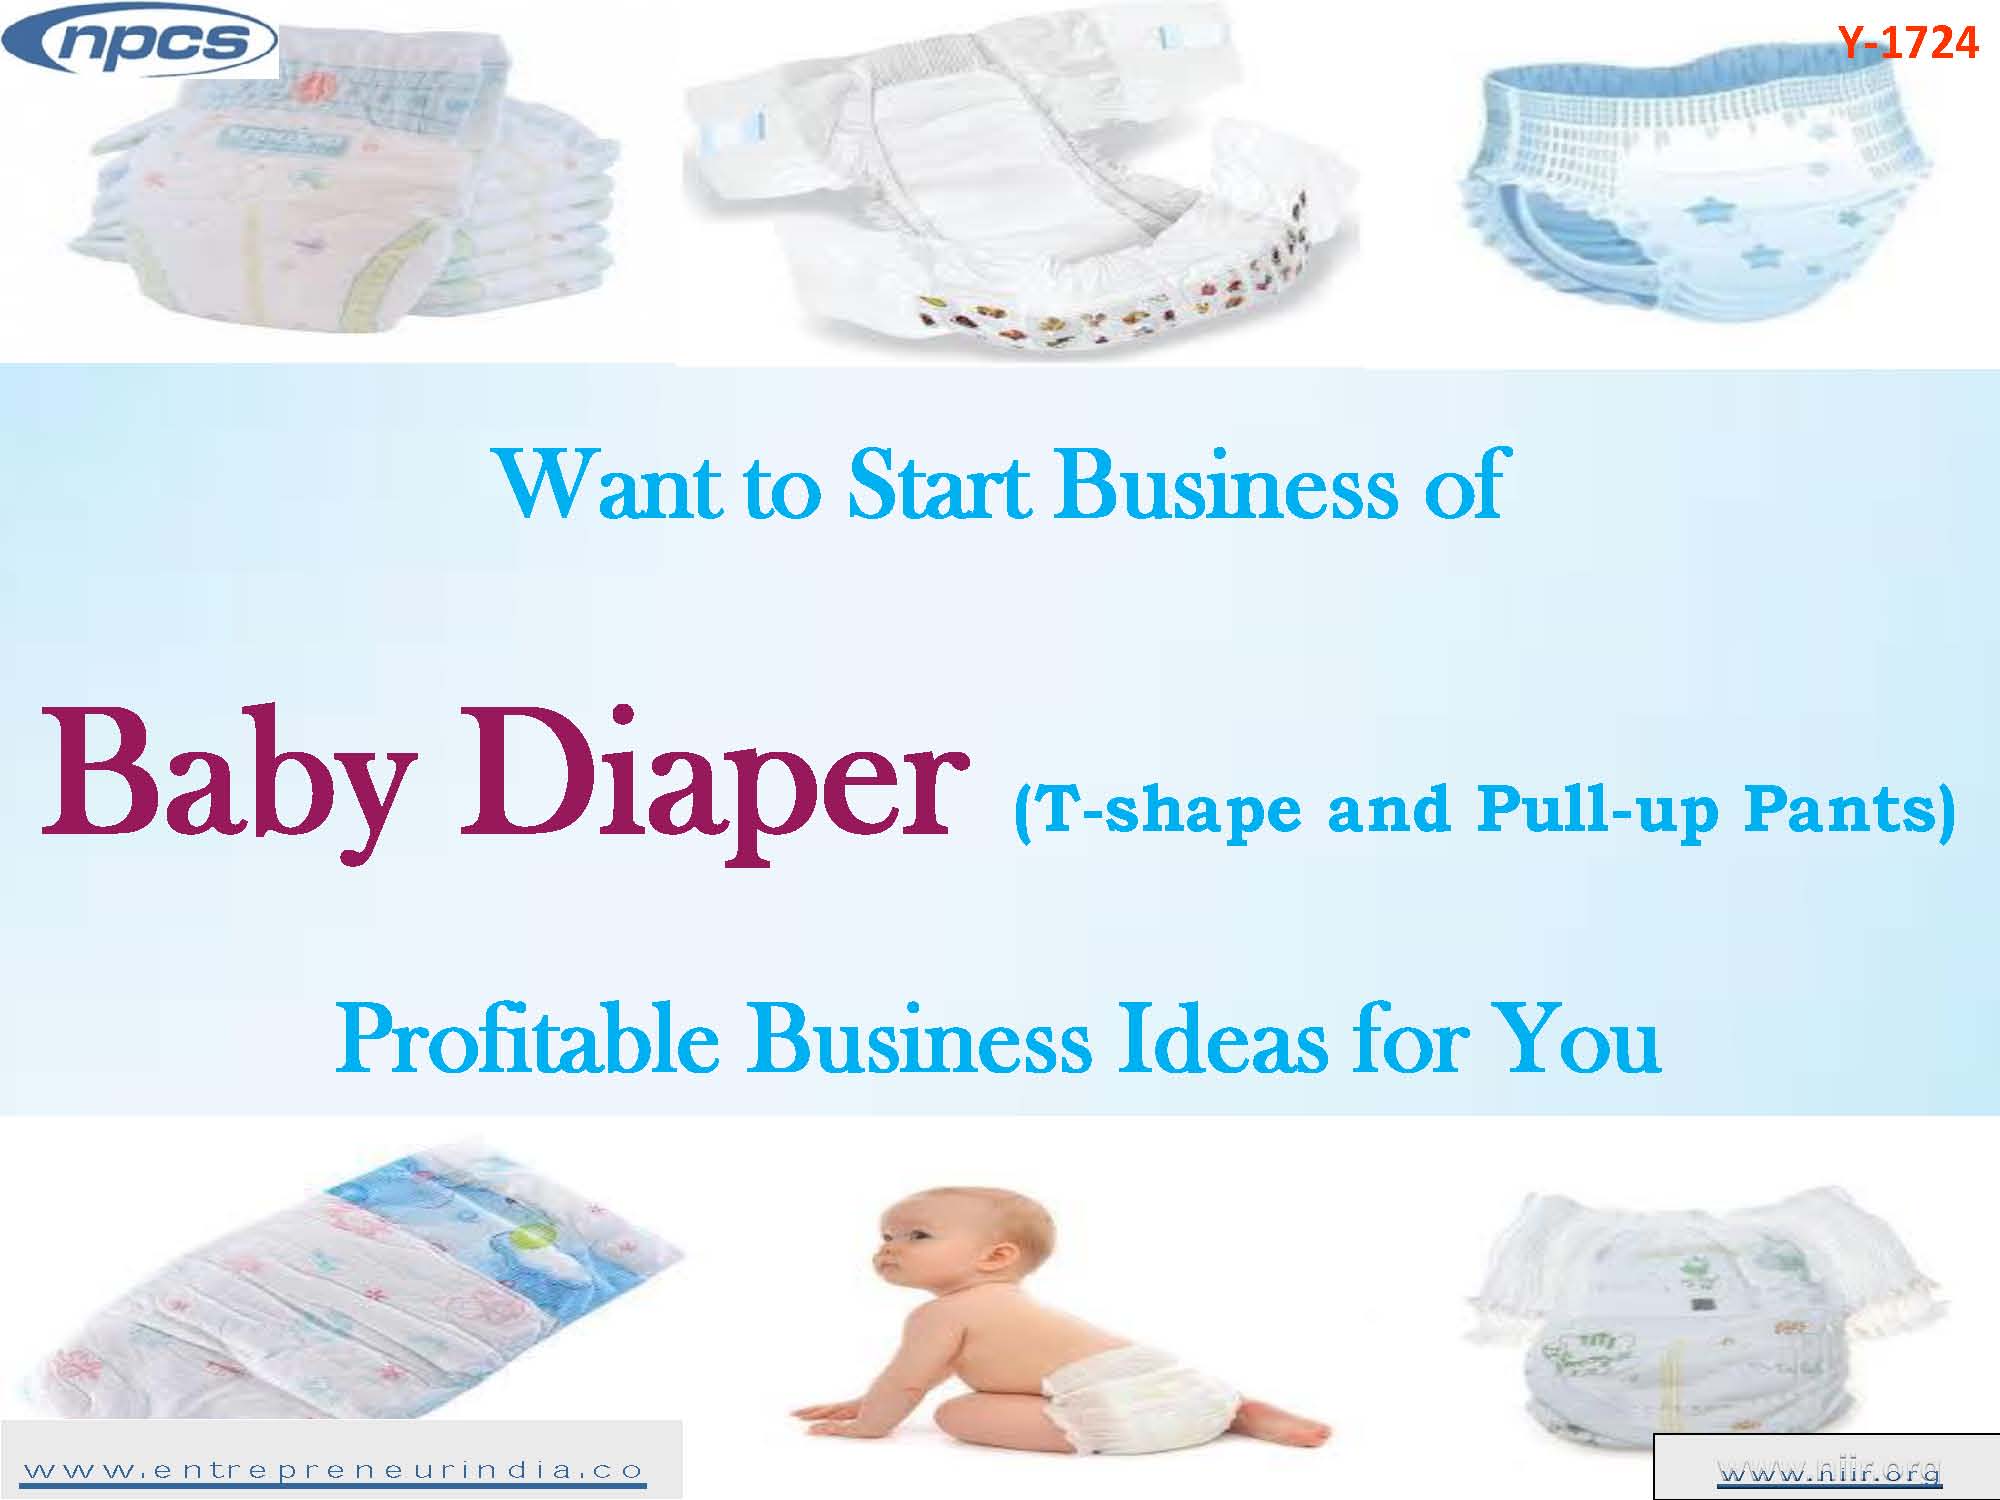 Want to Start Business of Baby Diaper (T-shape and Pull-up Pants)?  Profitable Business Ideas for You - Niir Project Consultancy Services